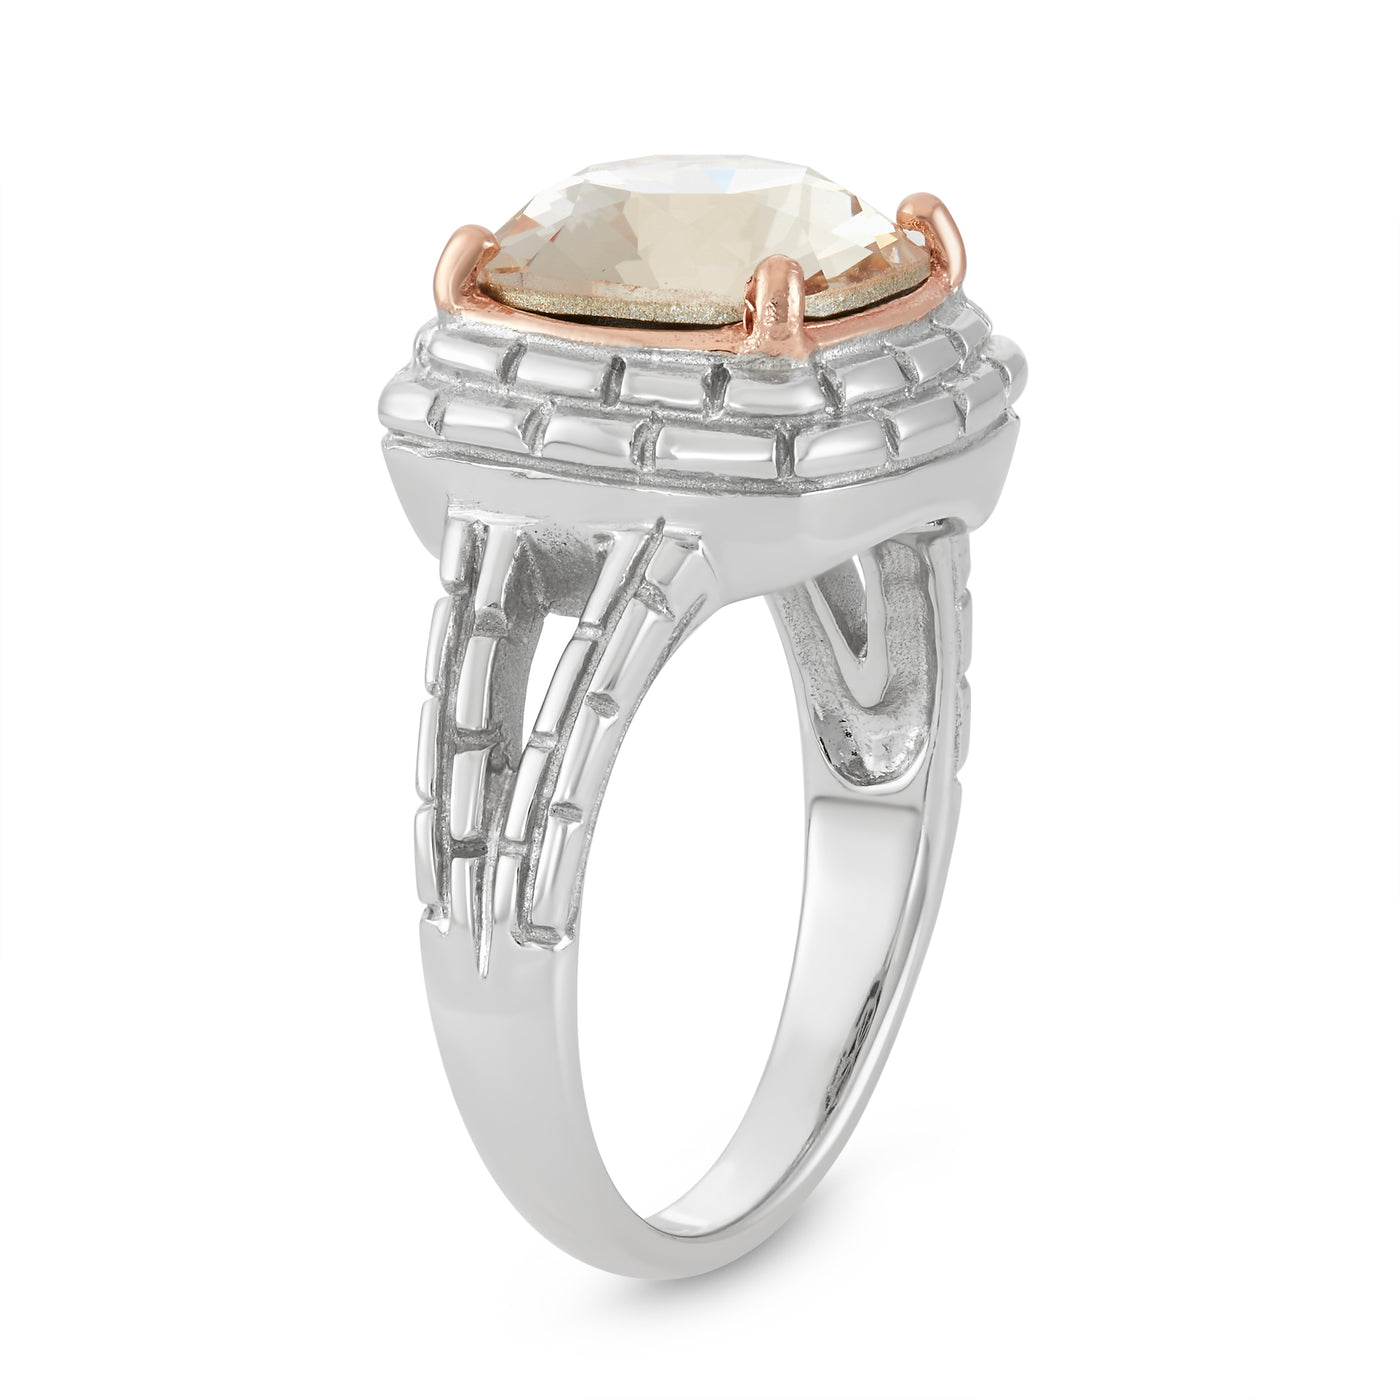 Rhodium and Rose Gold Plated Sterling Silver Cushion Cut Ring With Silk Crystal Elements